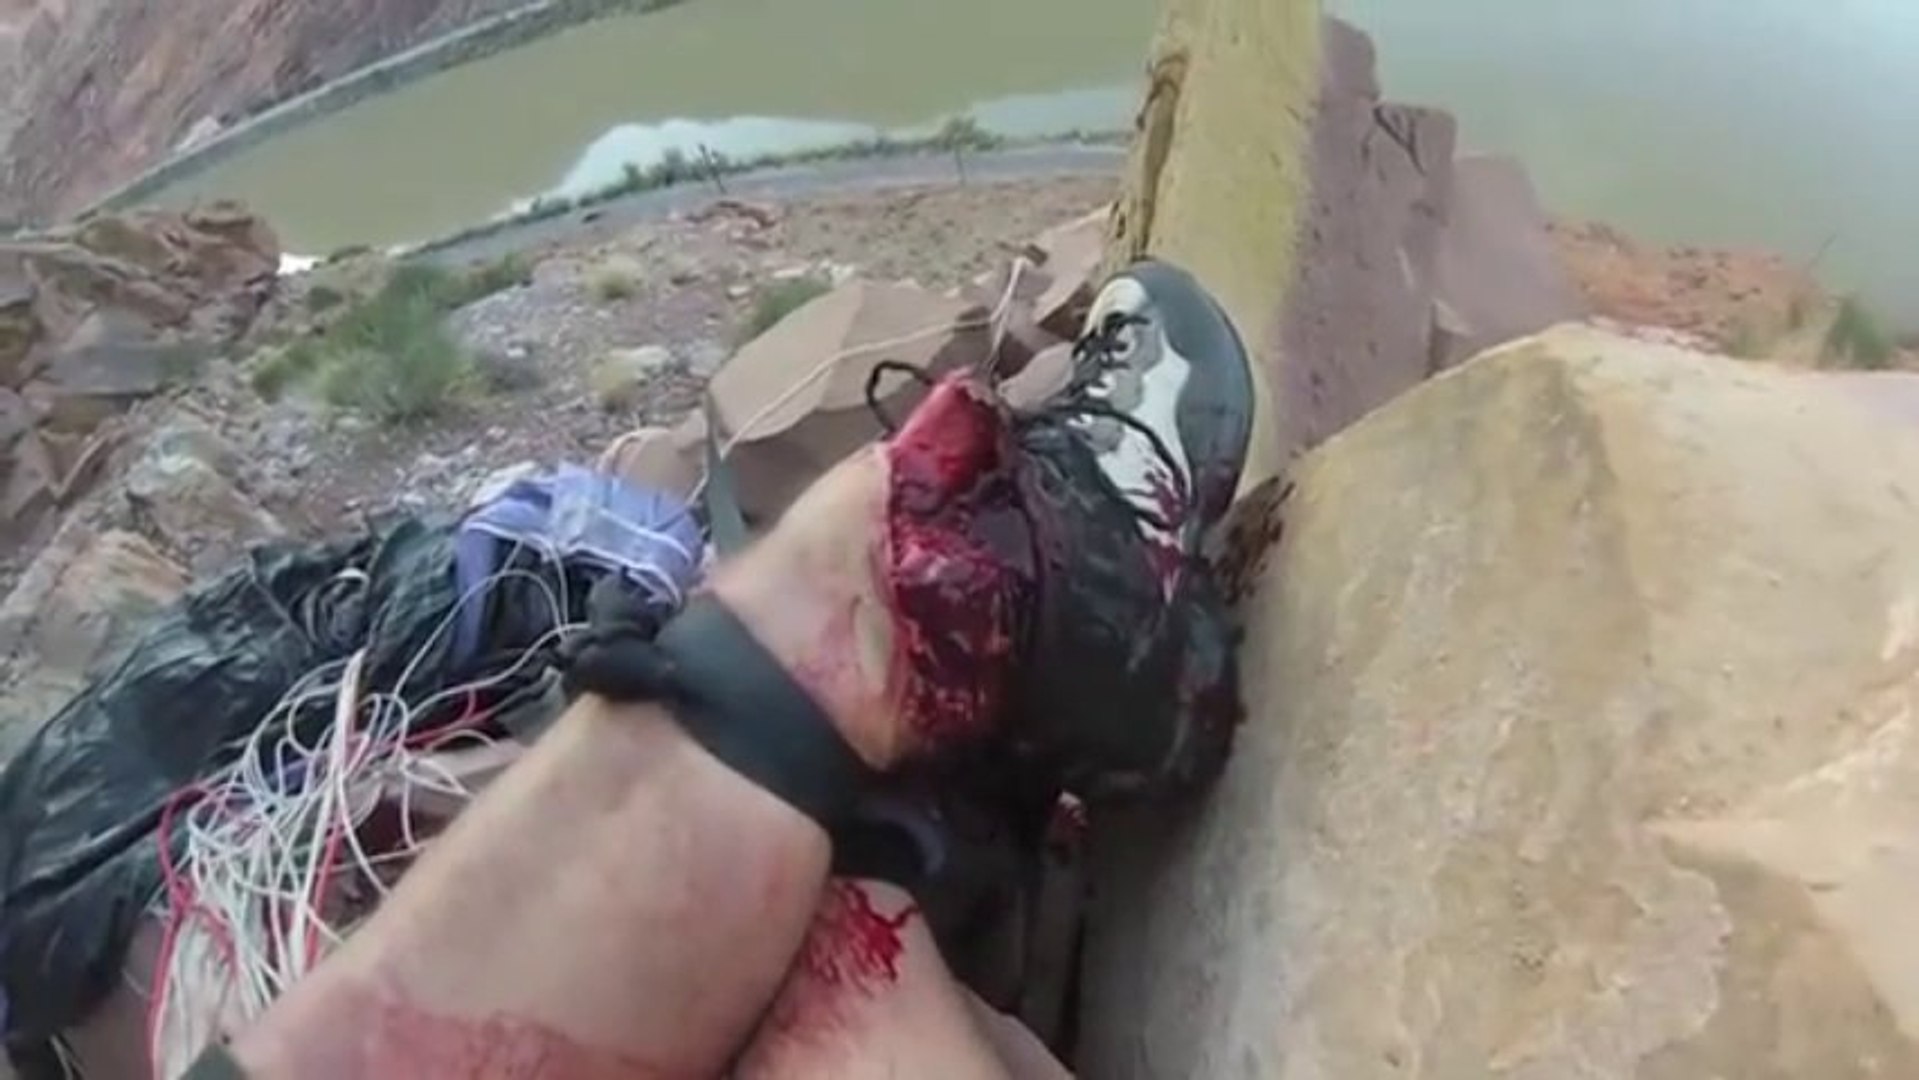 Open Leg Fracture after a Base jump accident. - Vidéo Dailymotion